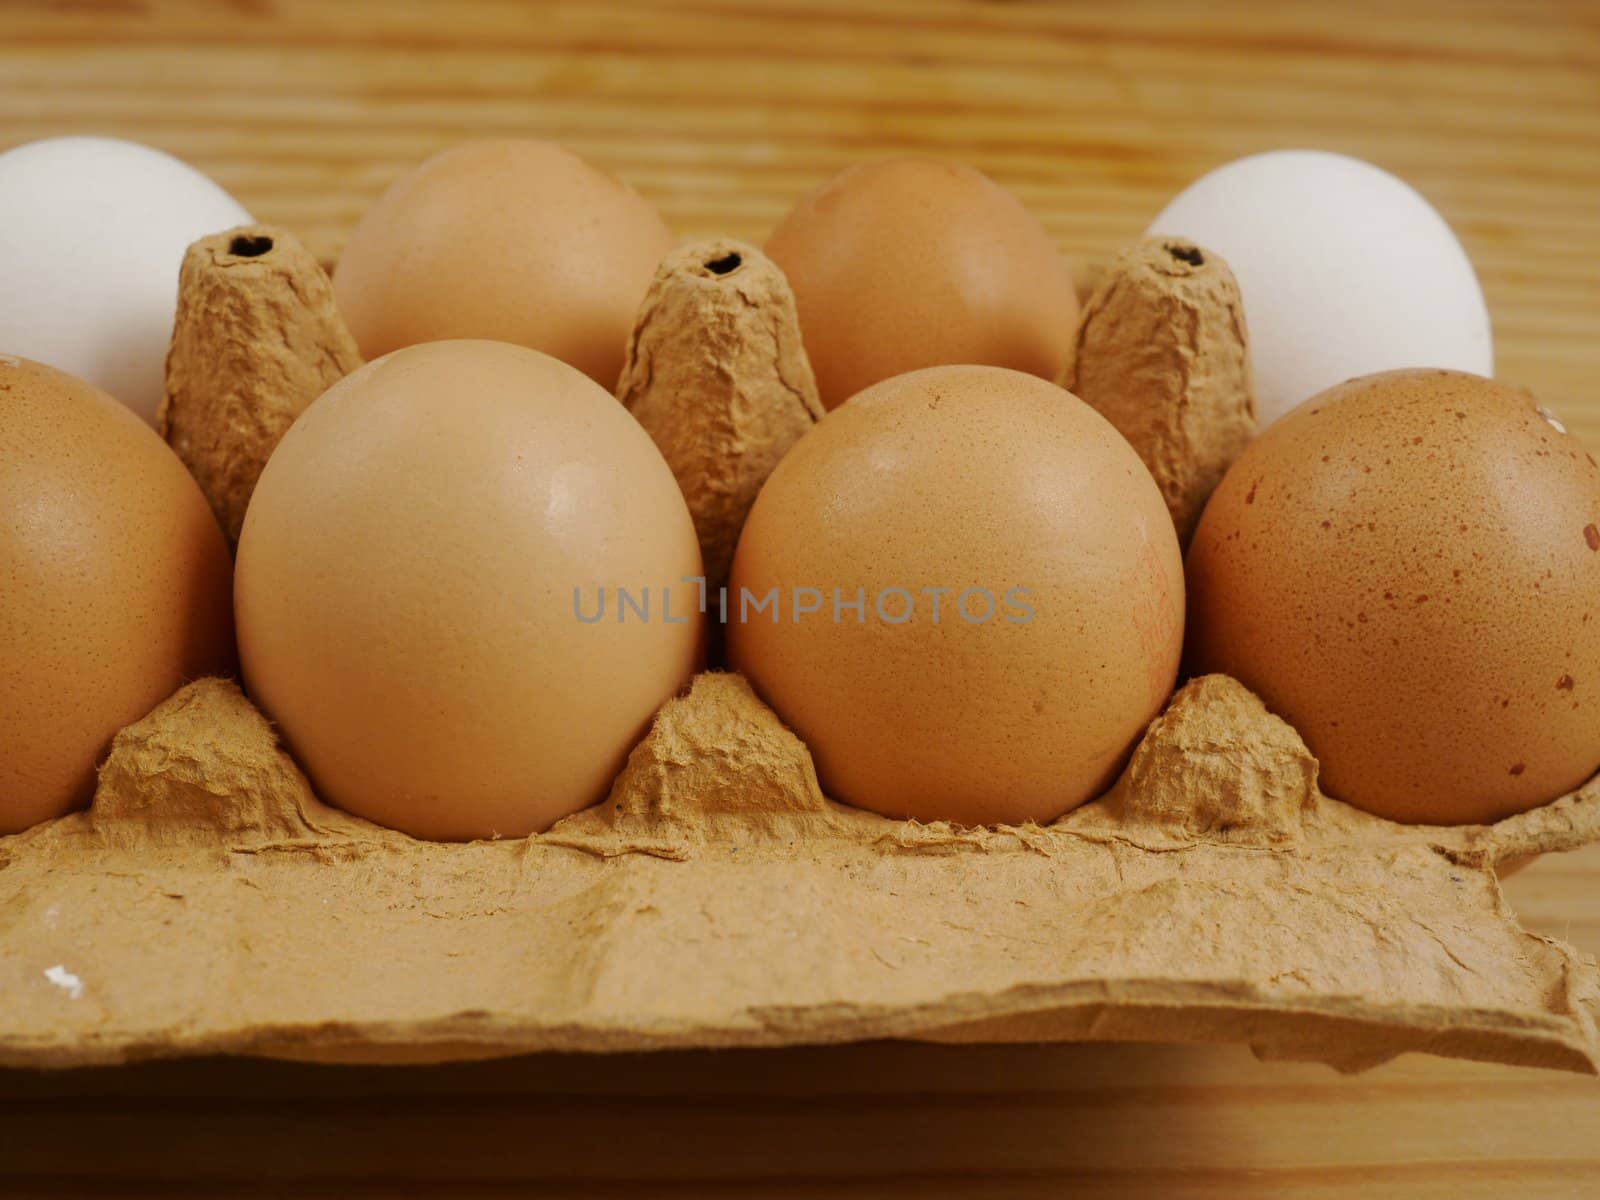 Eggs on a wooden surface by yucas